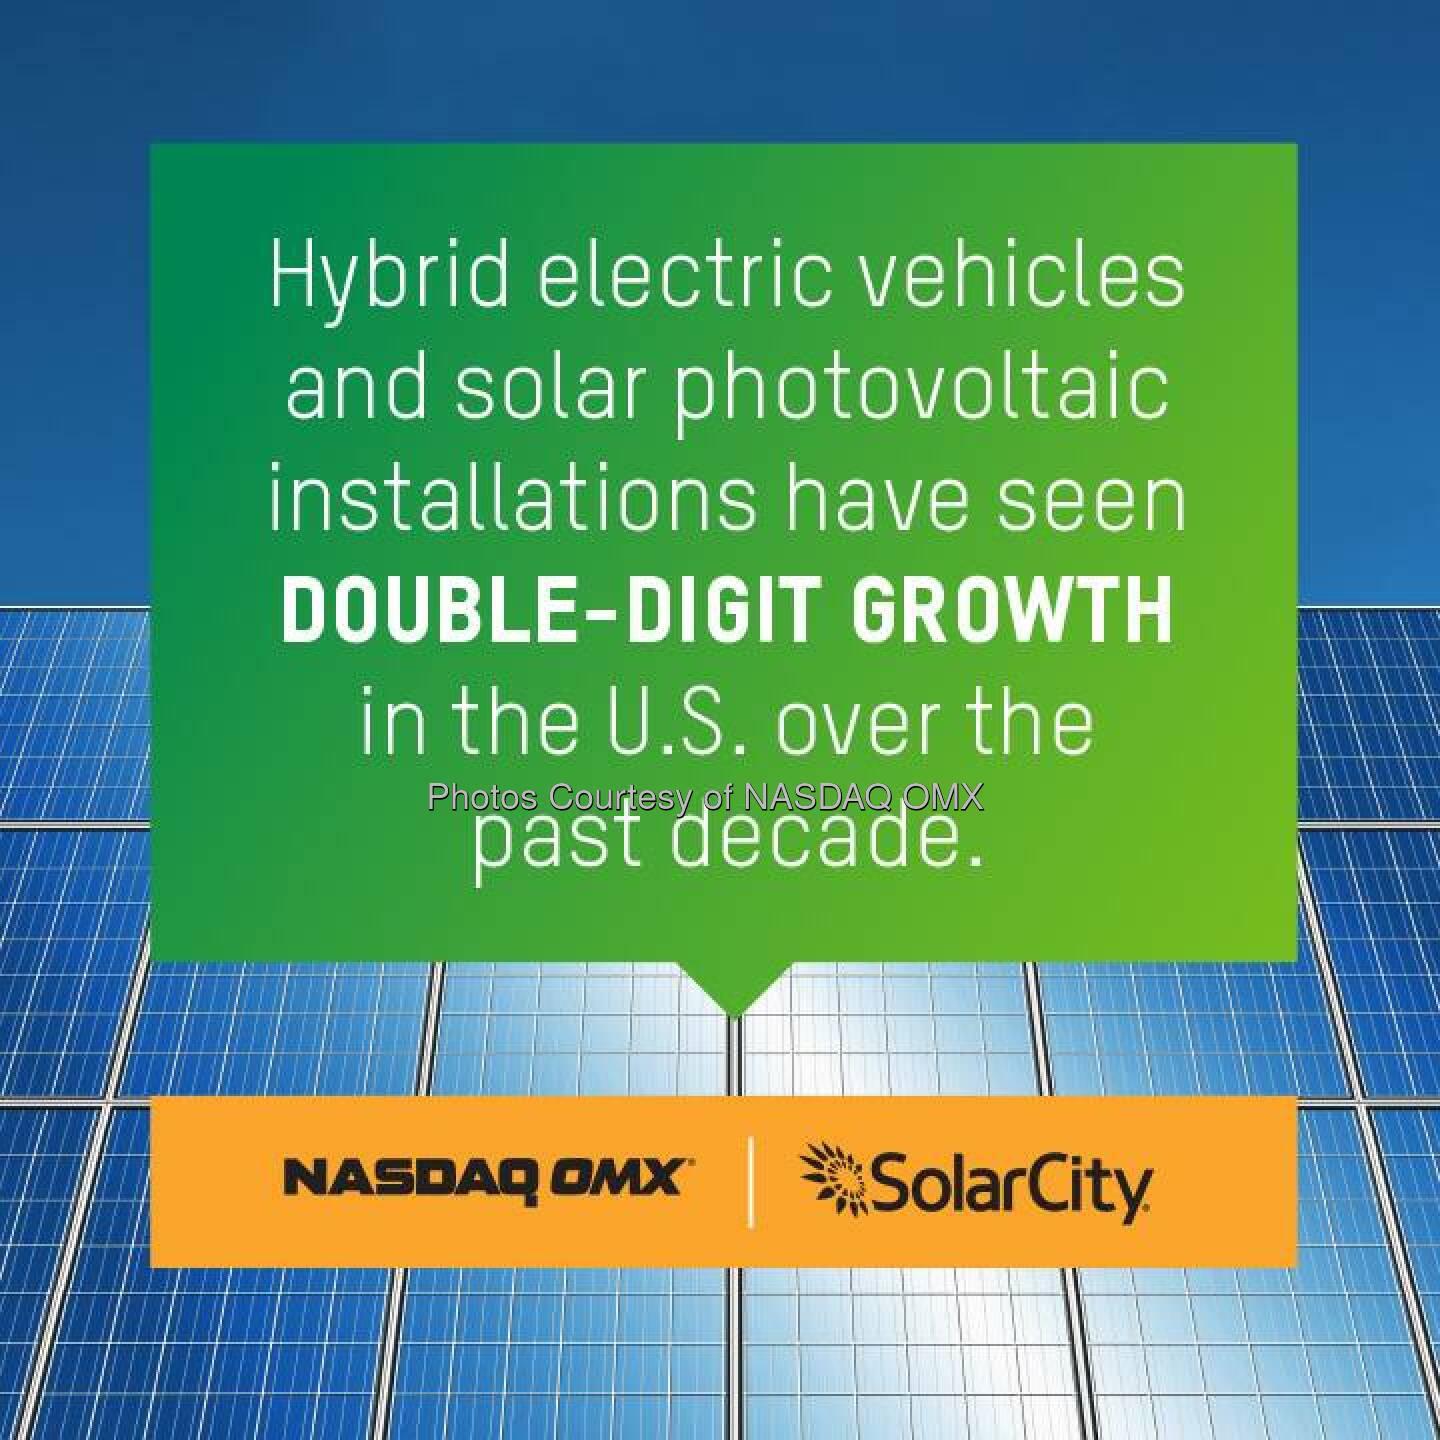 Did you know? Hybrids and Solar installations have seen double digit growth in the U.S. over the past decade.  NASDAQ OMX + SolarCity (http://bit.ly/1mtcetF)  Source: http://facebook.com/NASDAQ